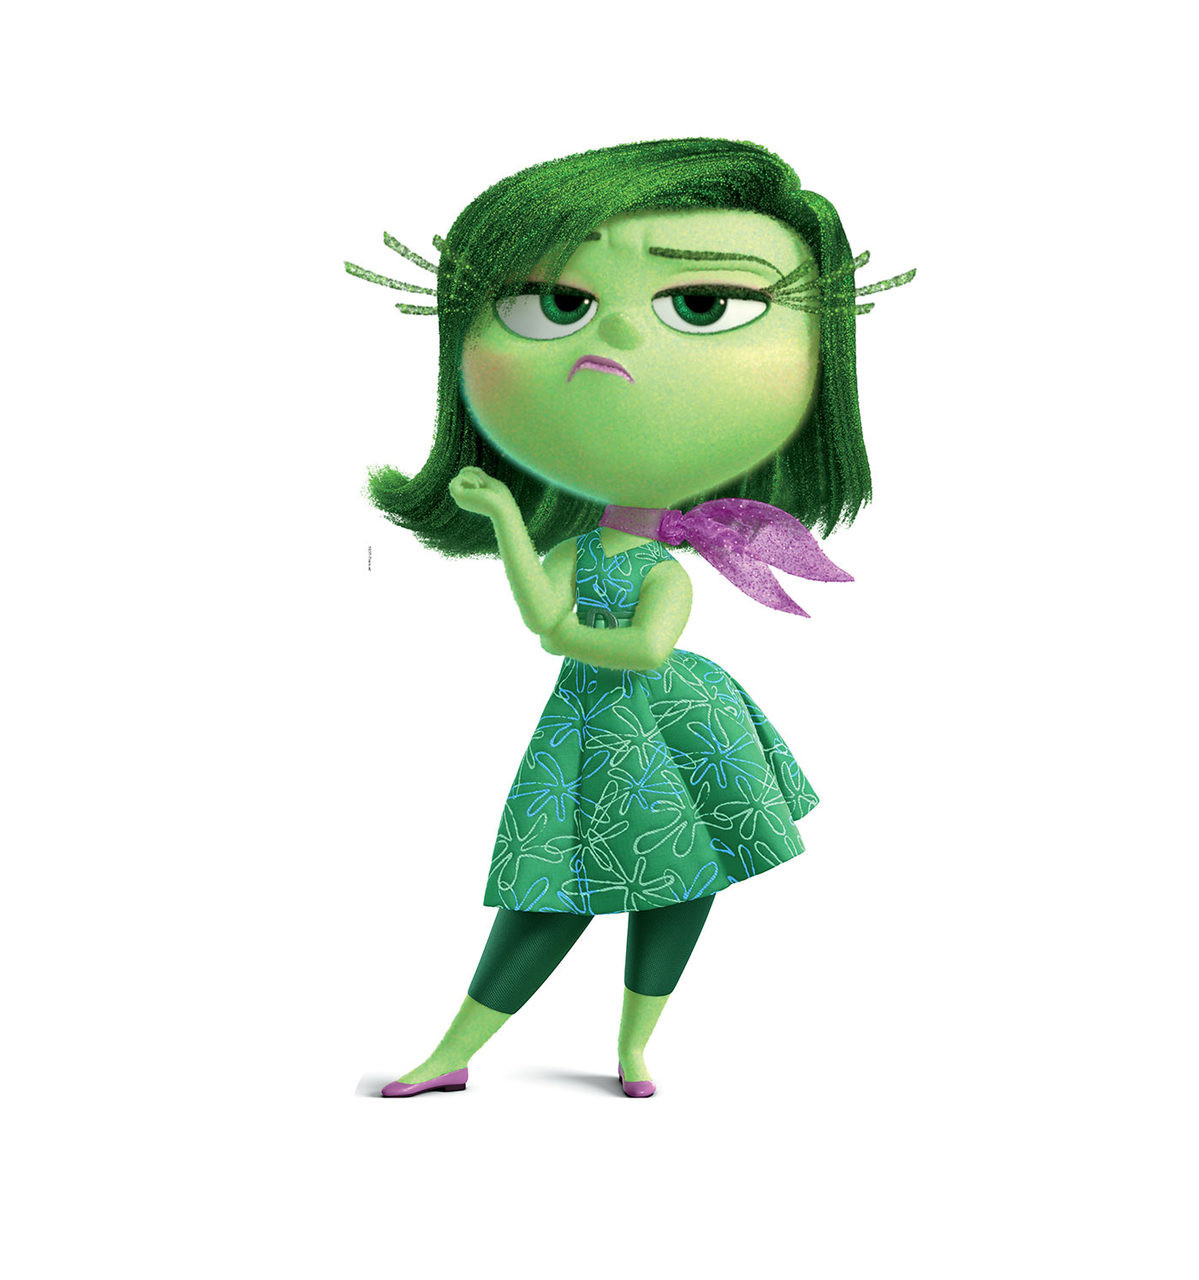 Life-size Disgust Inside Out Cardboard Cutout